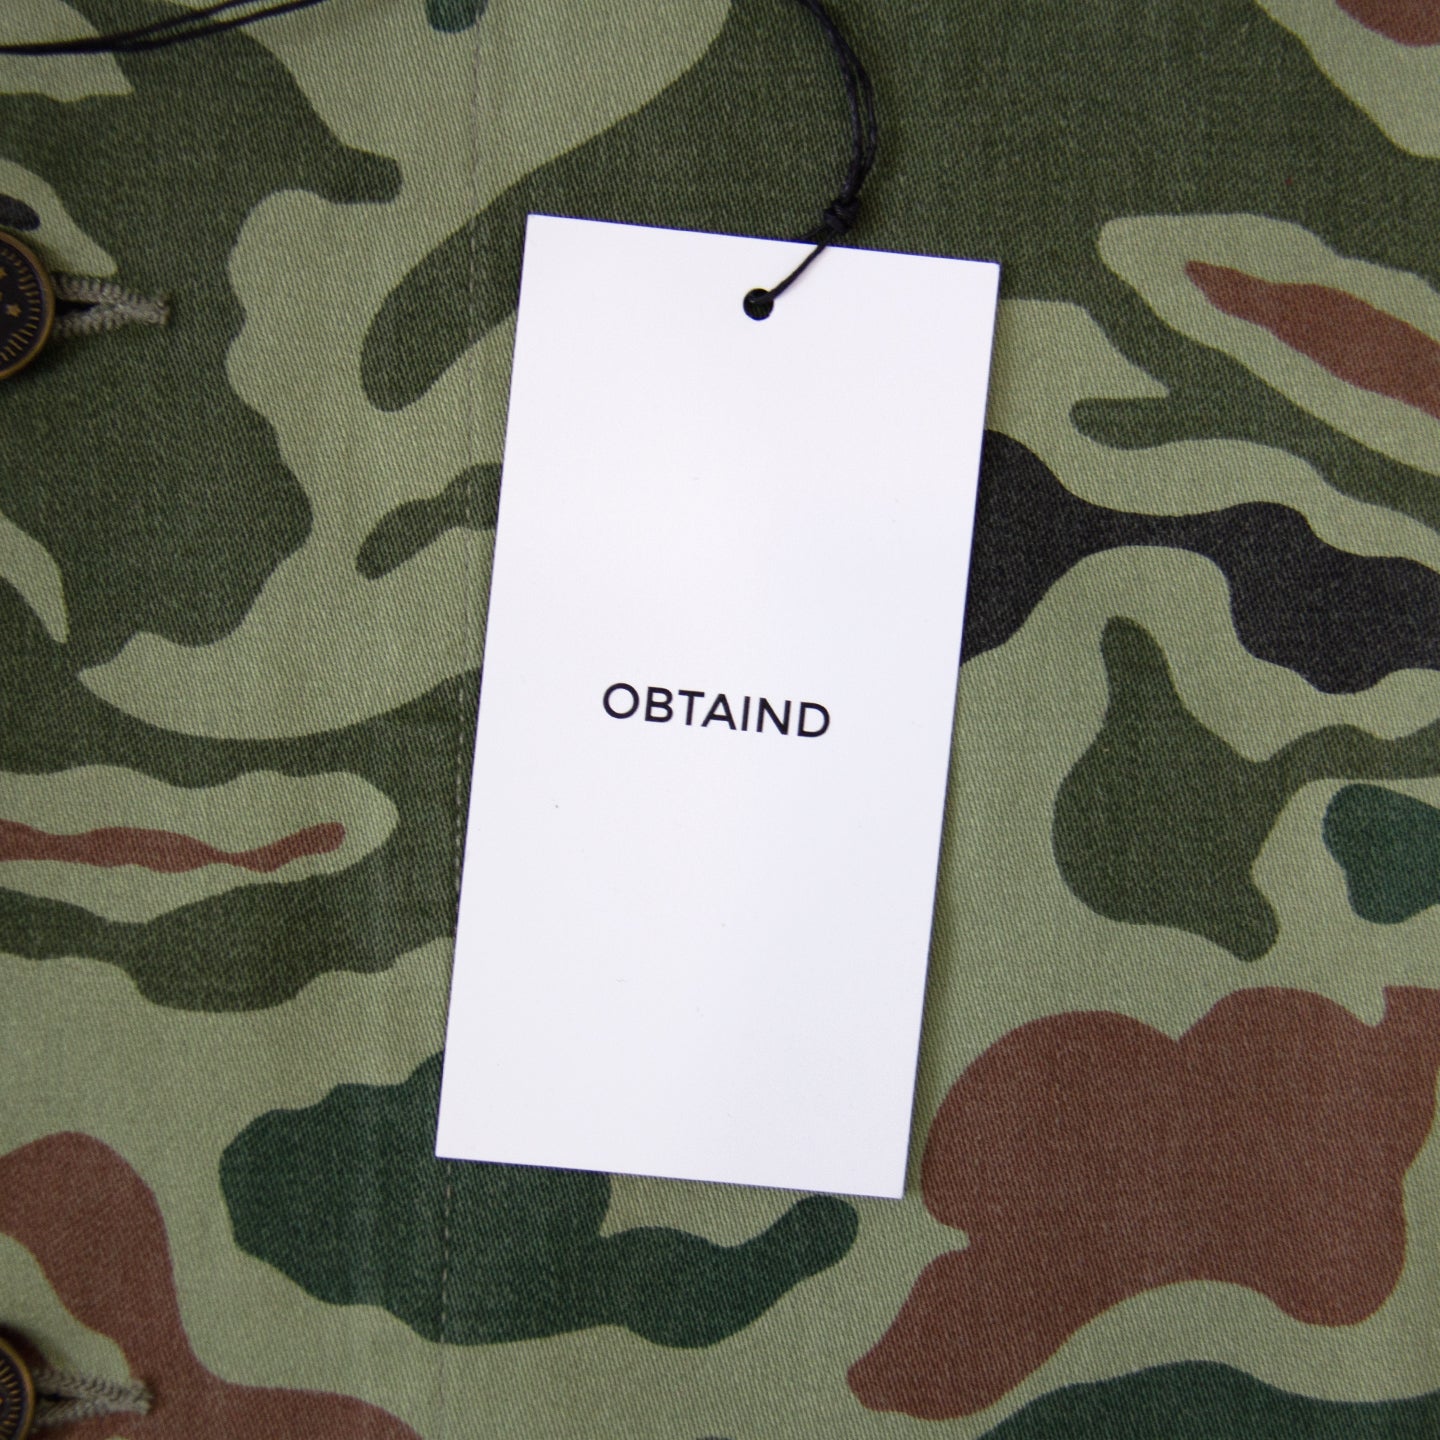 Supreme Technical Field Jacket Olive Digi Camo Large Sold Out In Hand  FreeShipng